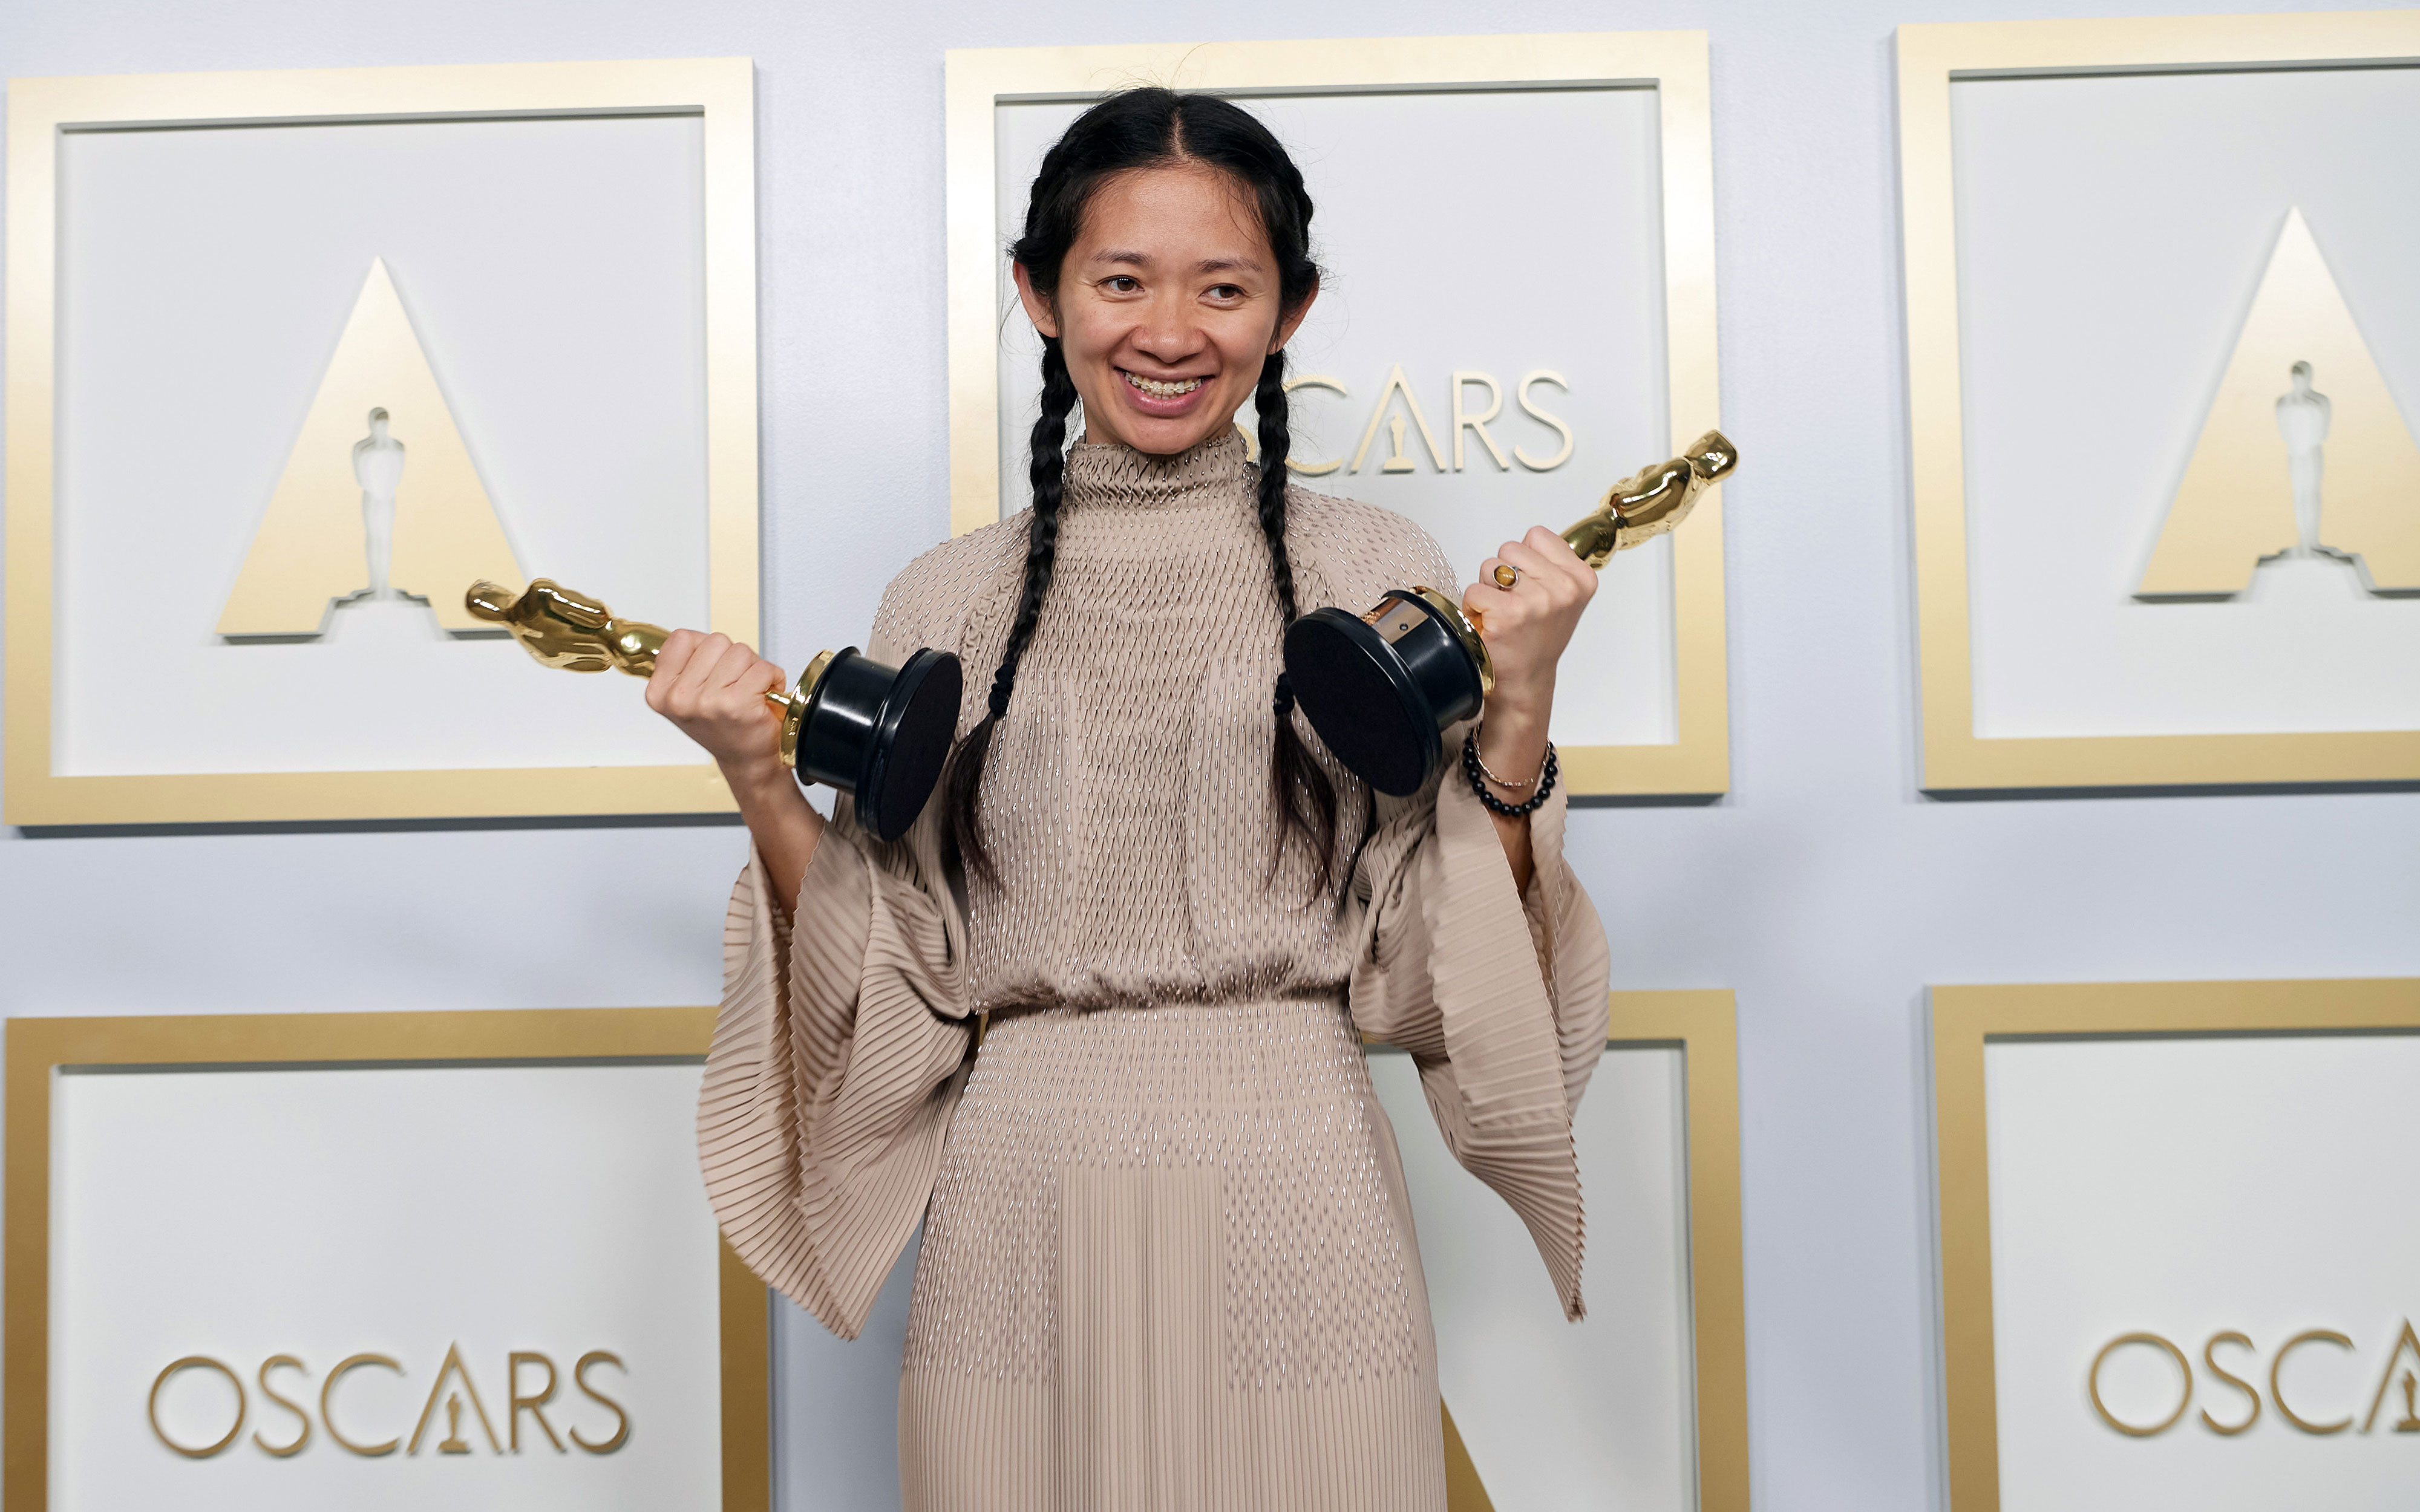 The 2021 Oscars Was a Night Full of Historic Wins